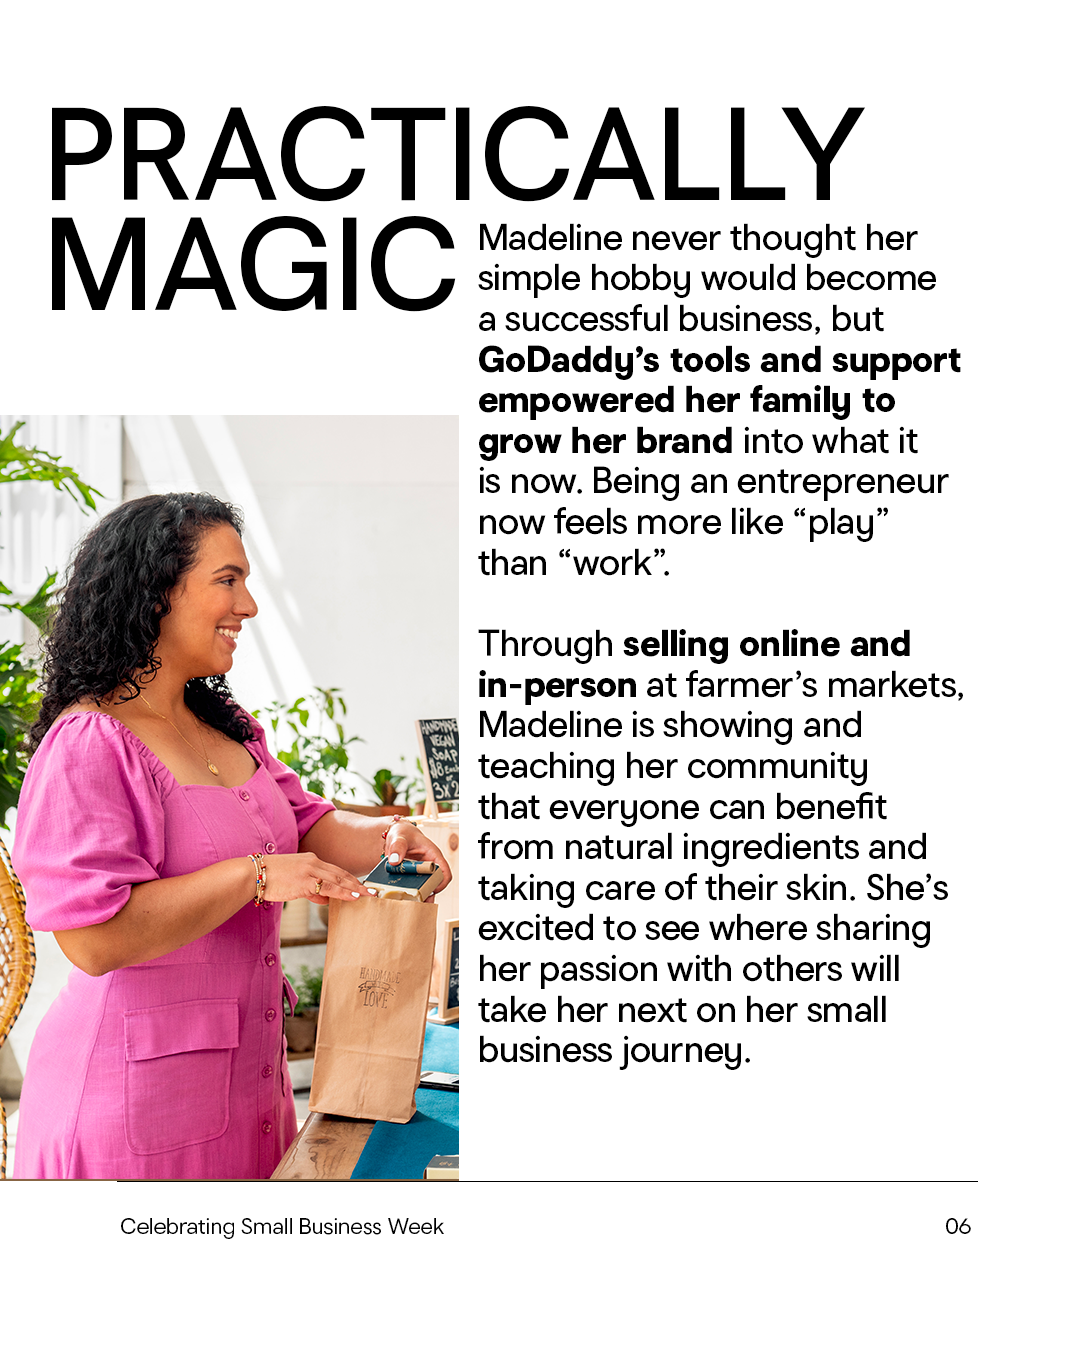 Practically magic: Madeline never thought her simple hobby would become a successful business.